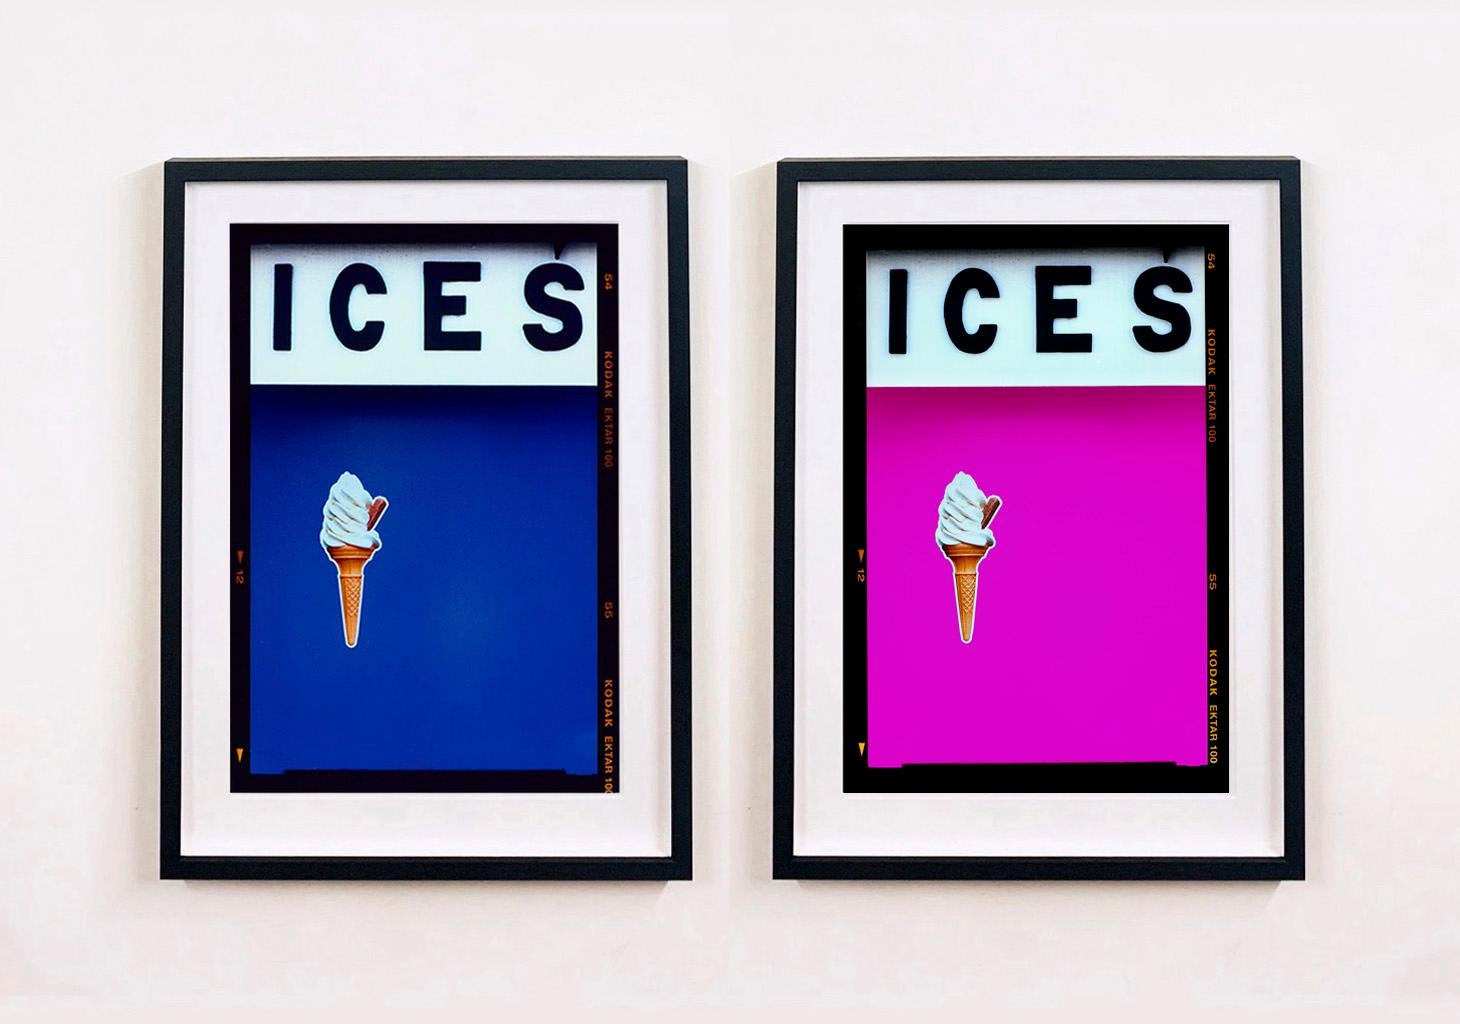 ICES, by Richard Heeps, photographed at the British Seaside at the end of summer 2020. This artwork is about evoking memories of the simple joy of days by the beach. The bold color blocking, typography and the surreal twist of the suspended ice